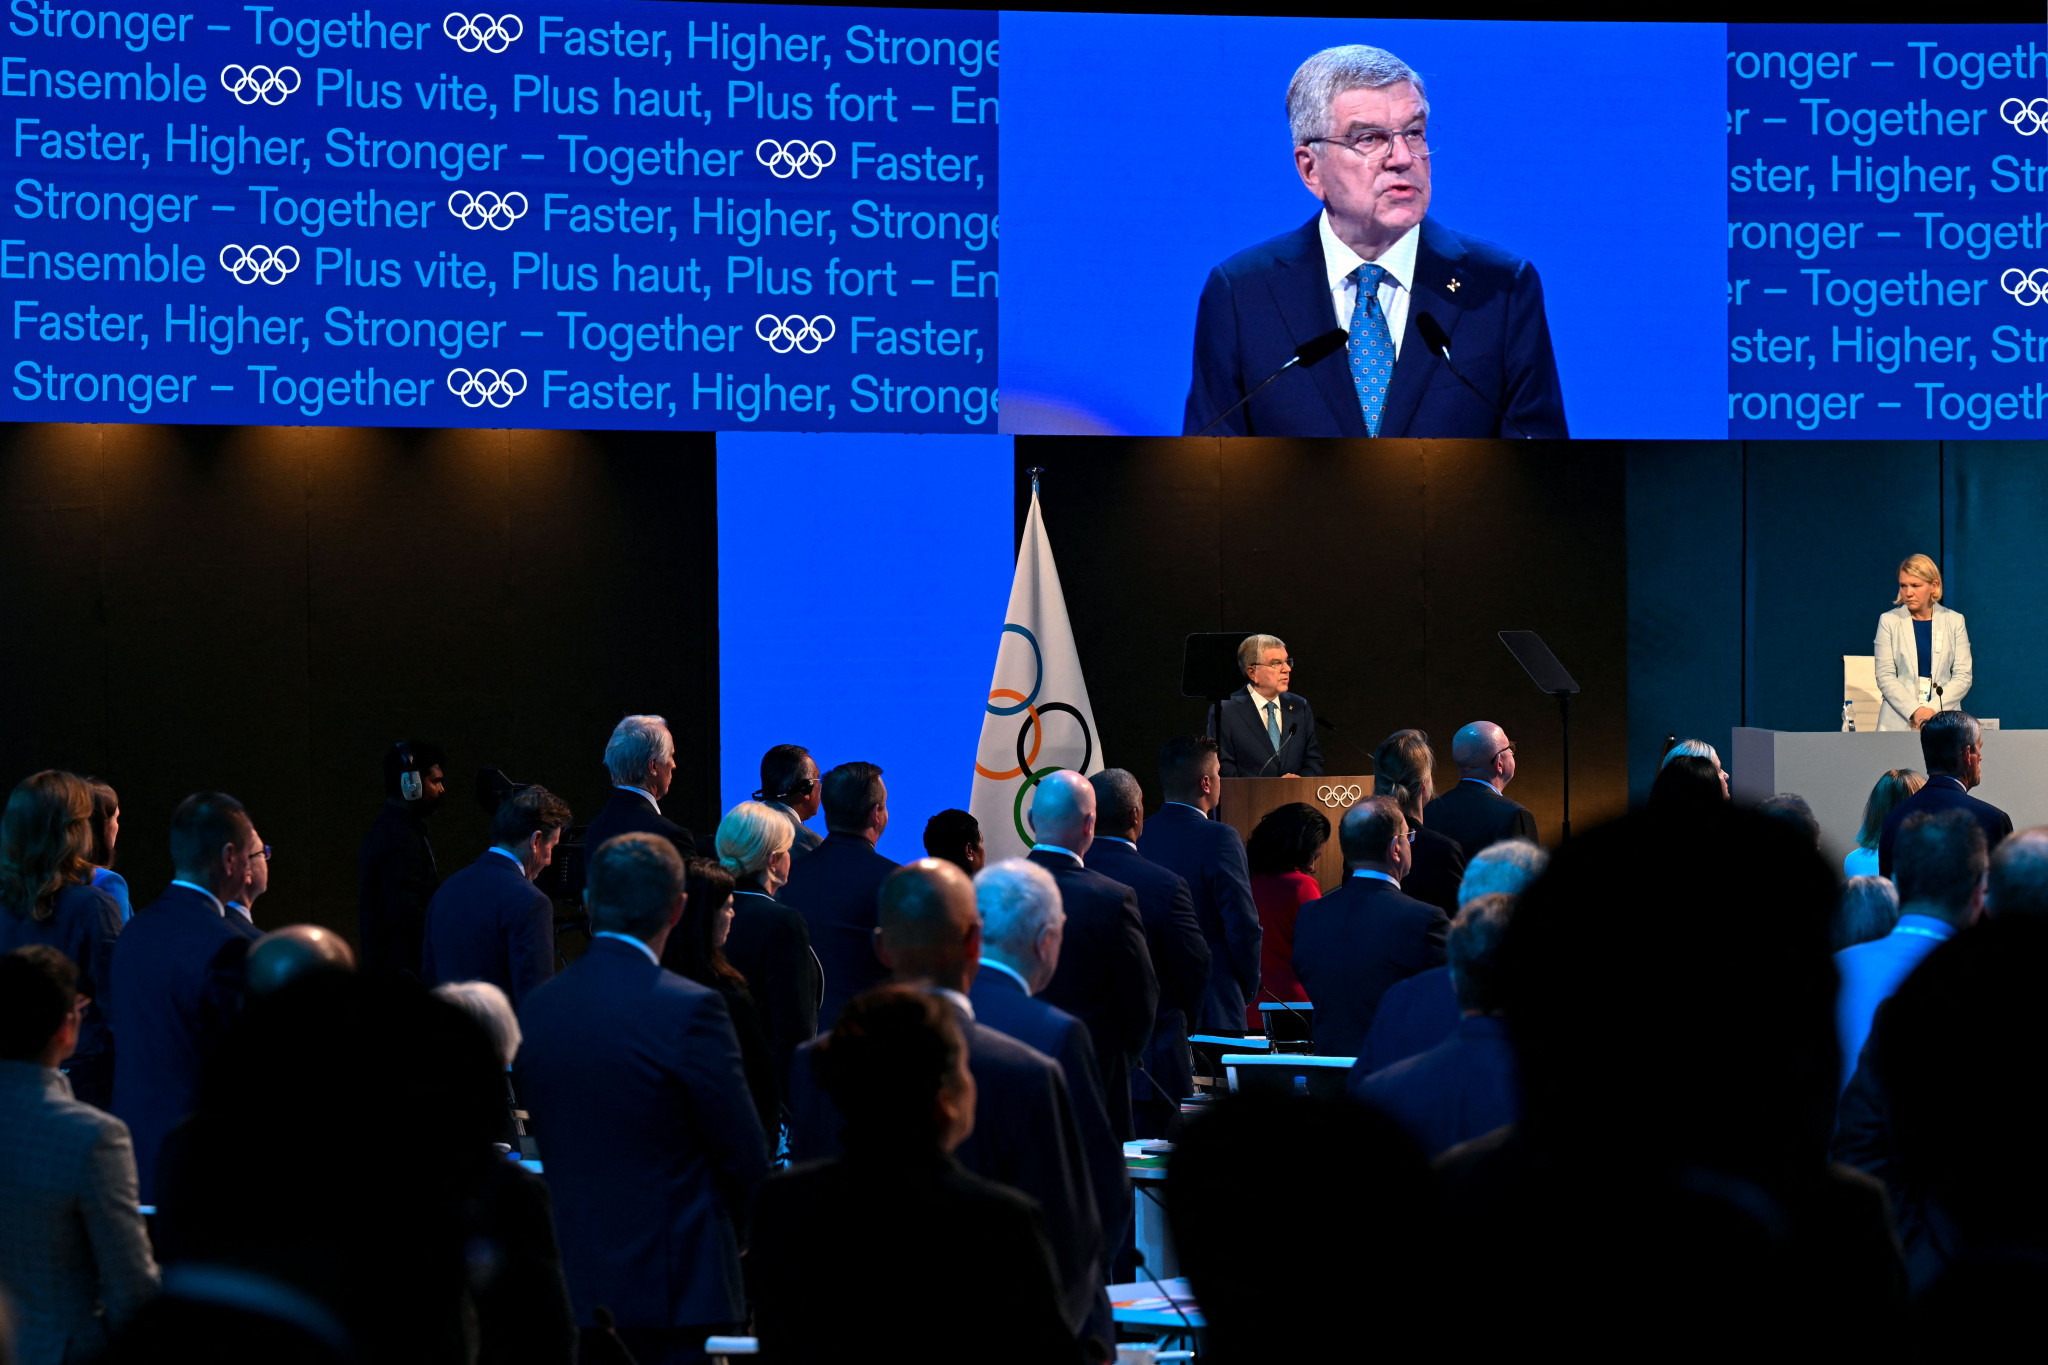 Olympic Agenda 2020+5 progress discussed on day one of IOC Session